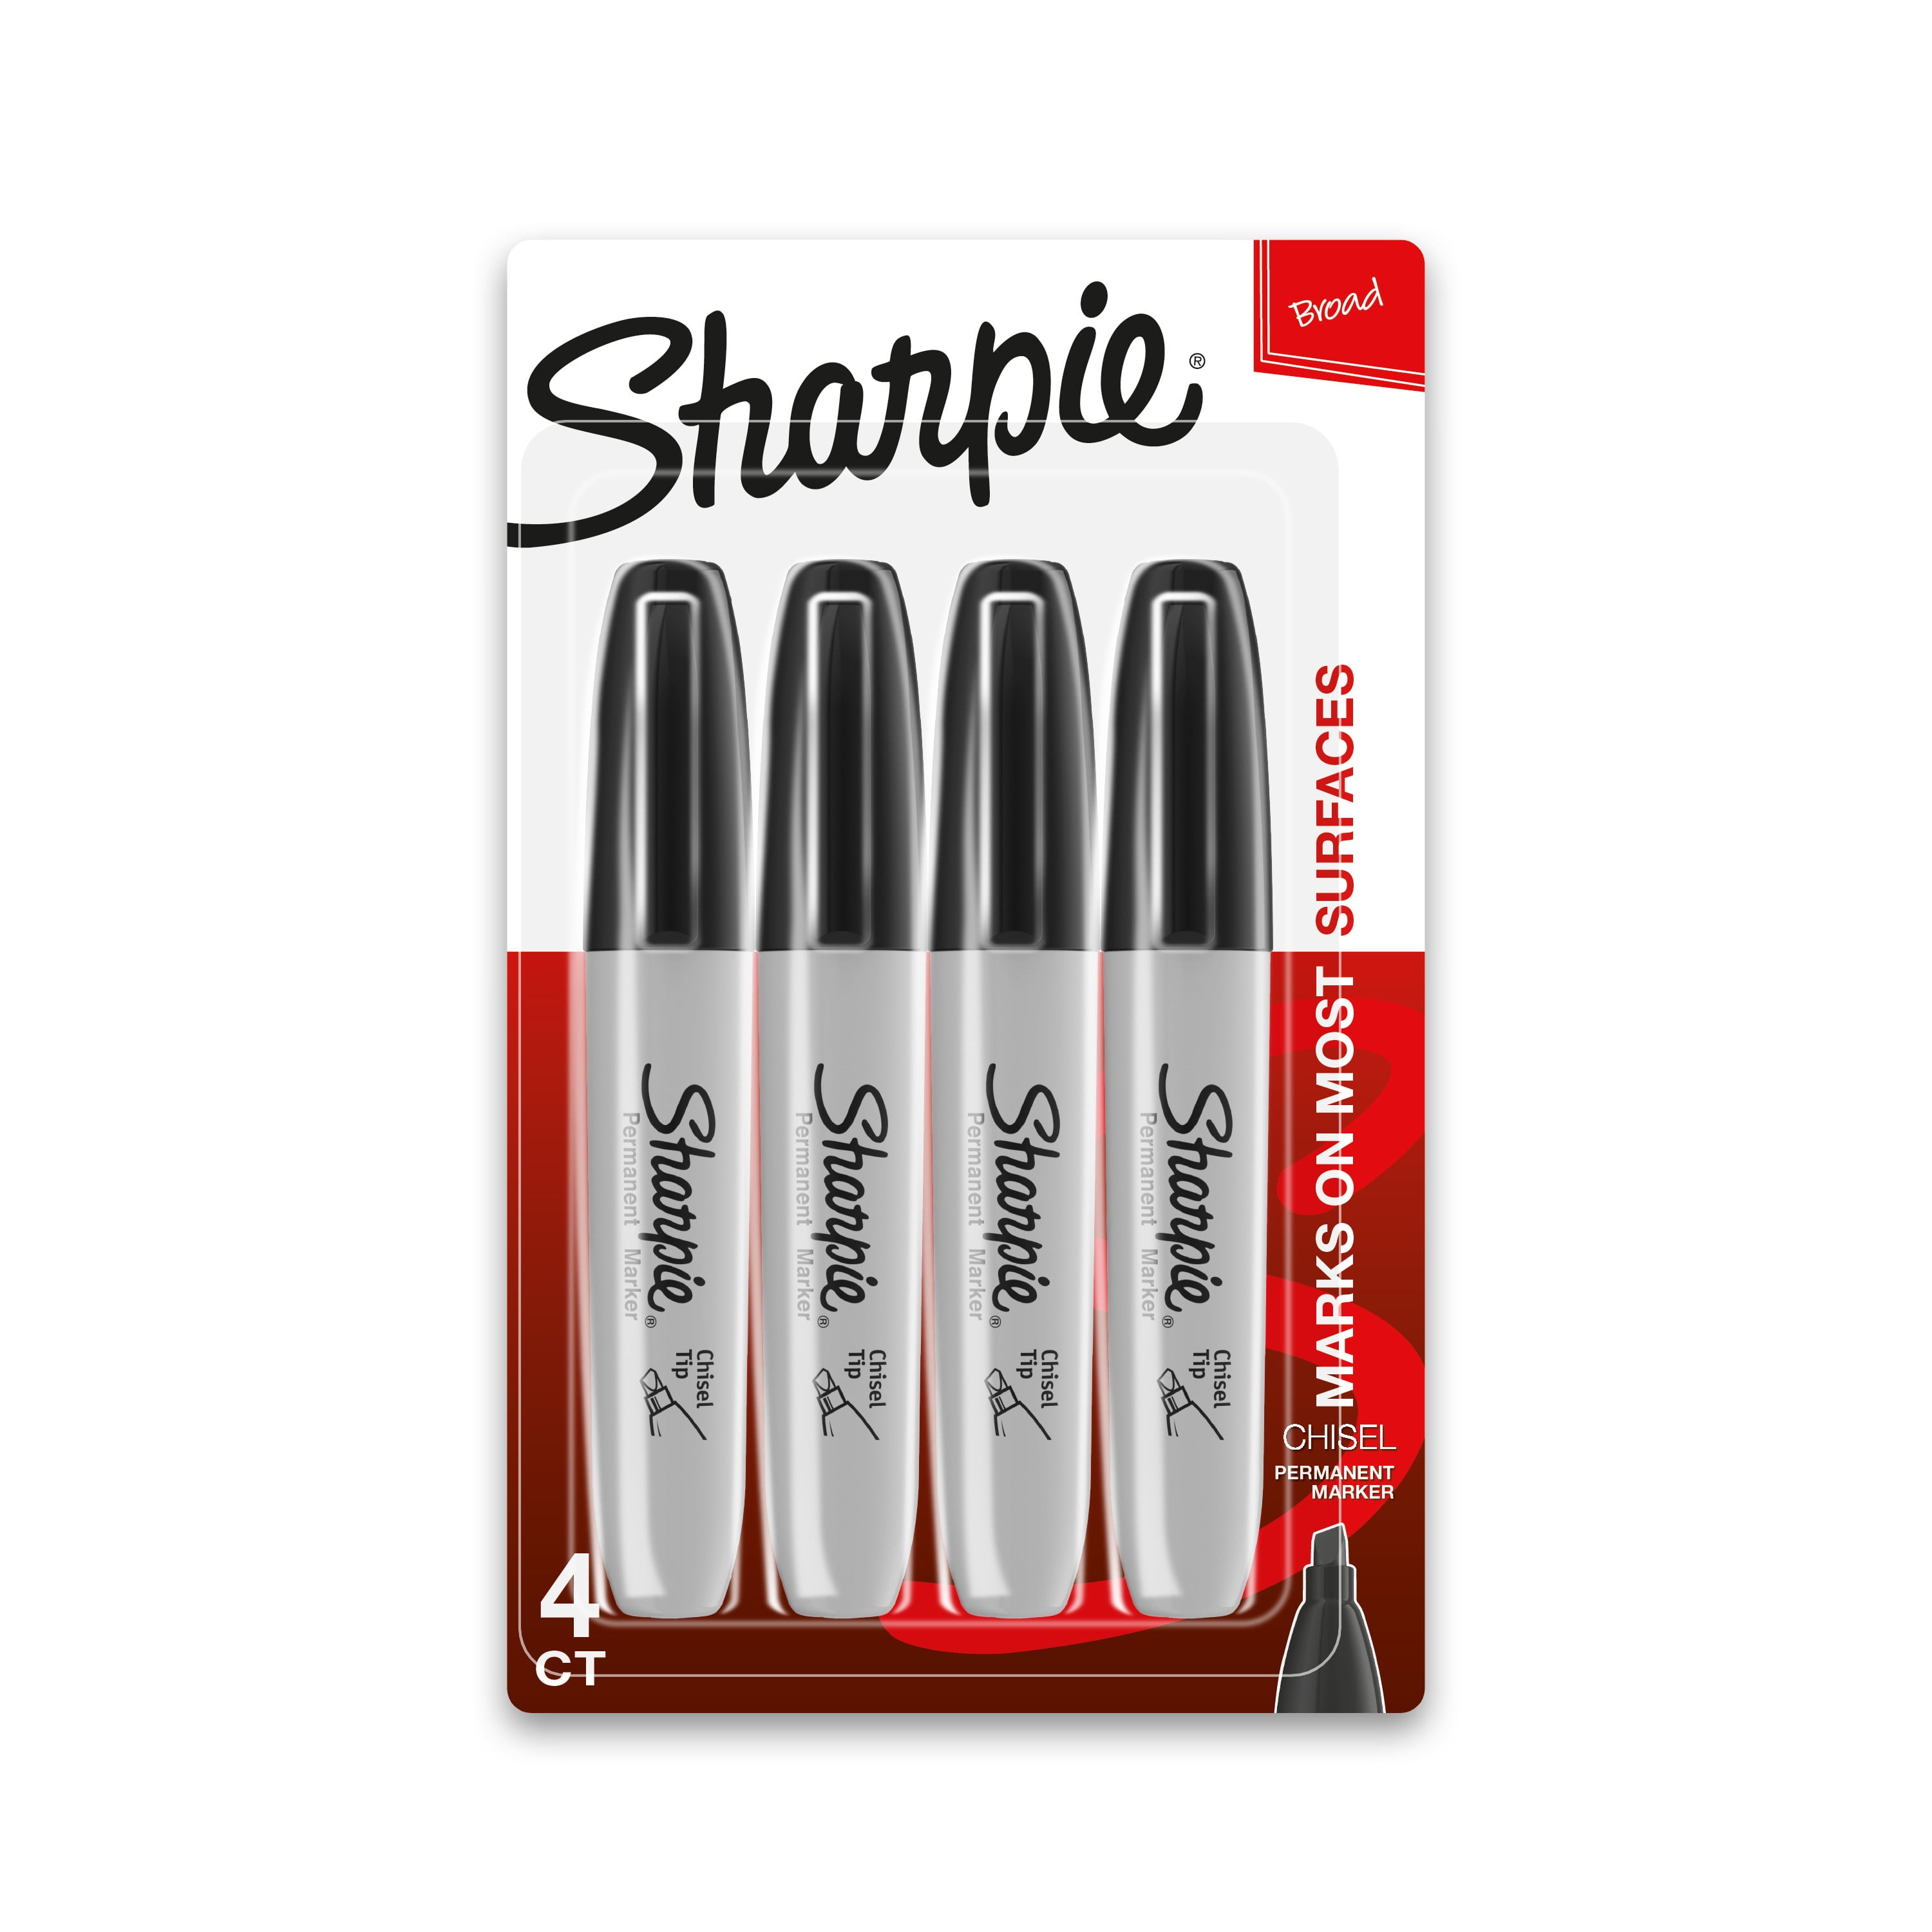 Sharpie Permanent Markers, Chisel Tip, Black Ink, Pack Of 4 Markers